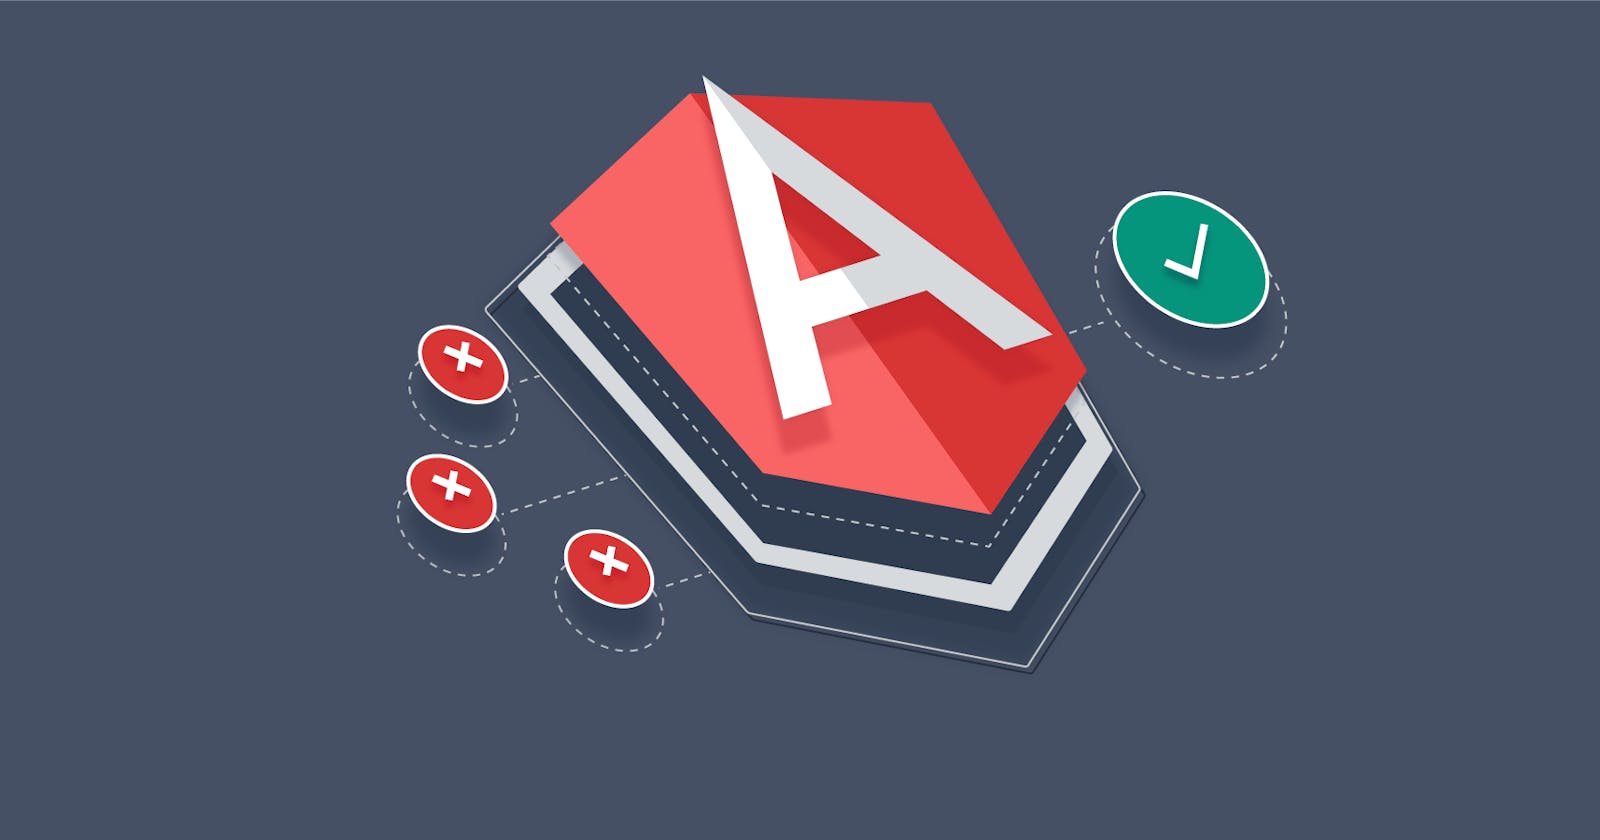 The Complete Guide to Angular